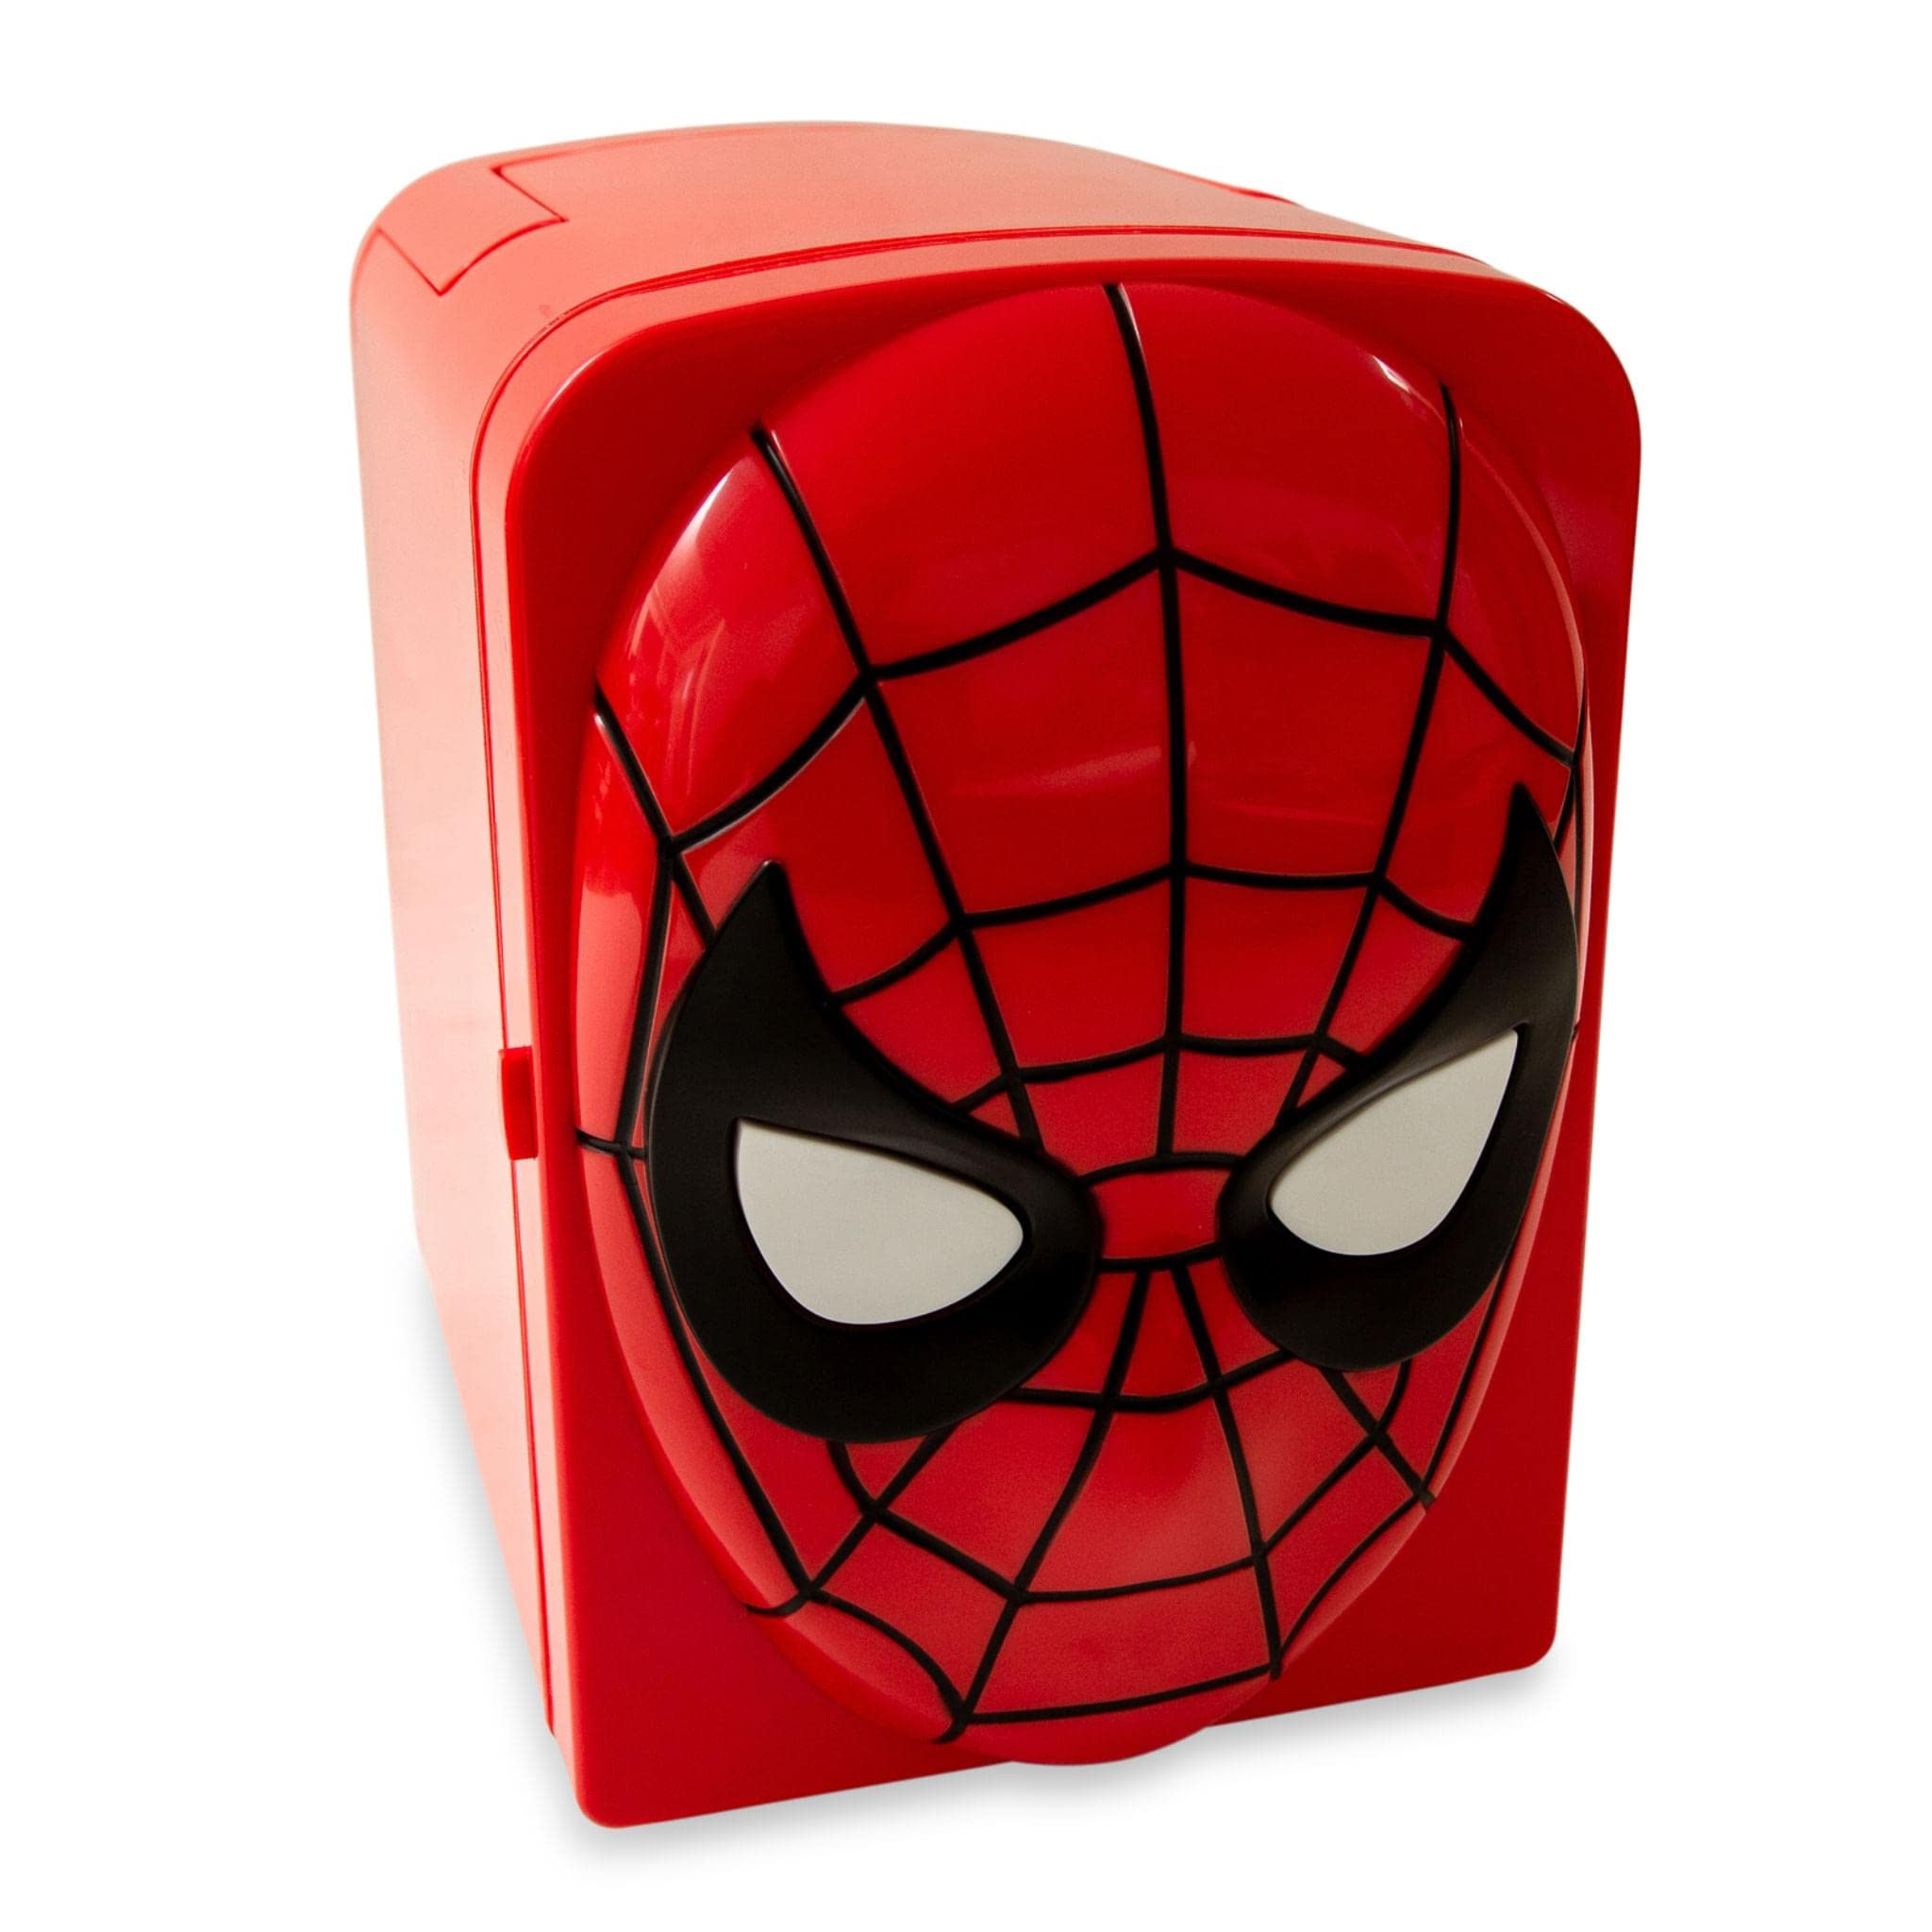 Ukonic Marvel comics Spider-Man 4-Liter Mini Fridge Thermoelectric cooler, Holds 6 cans Small Refrigerator Drink cooler for Soda, Beer,